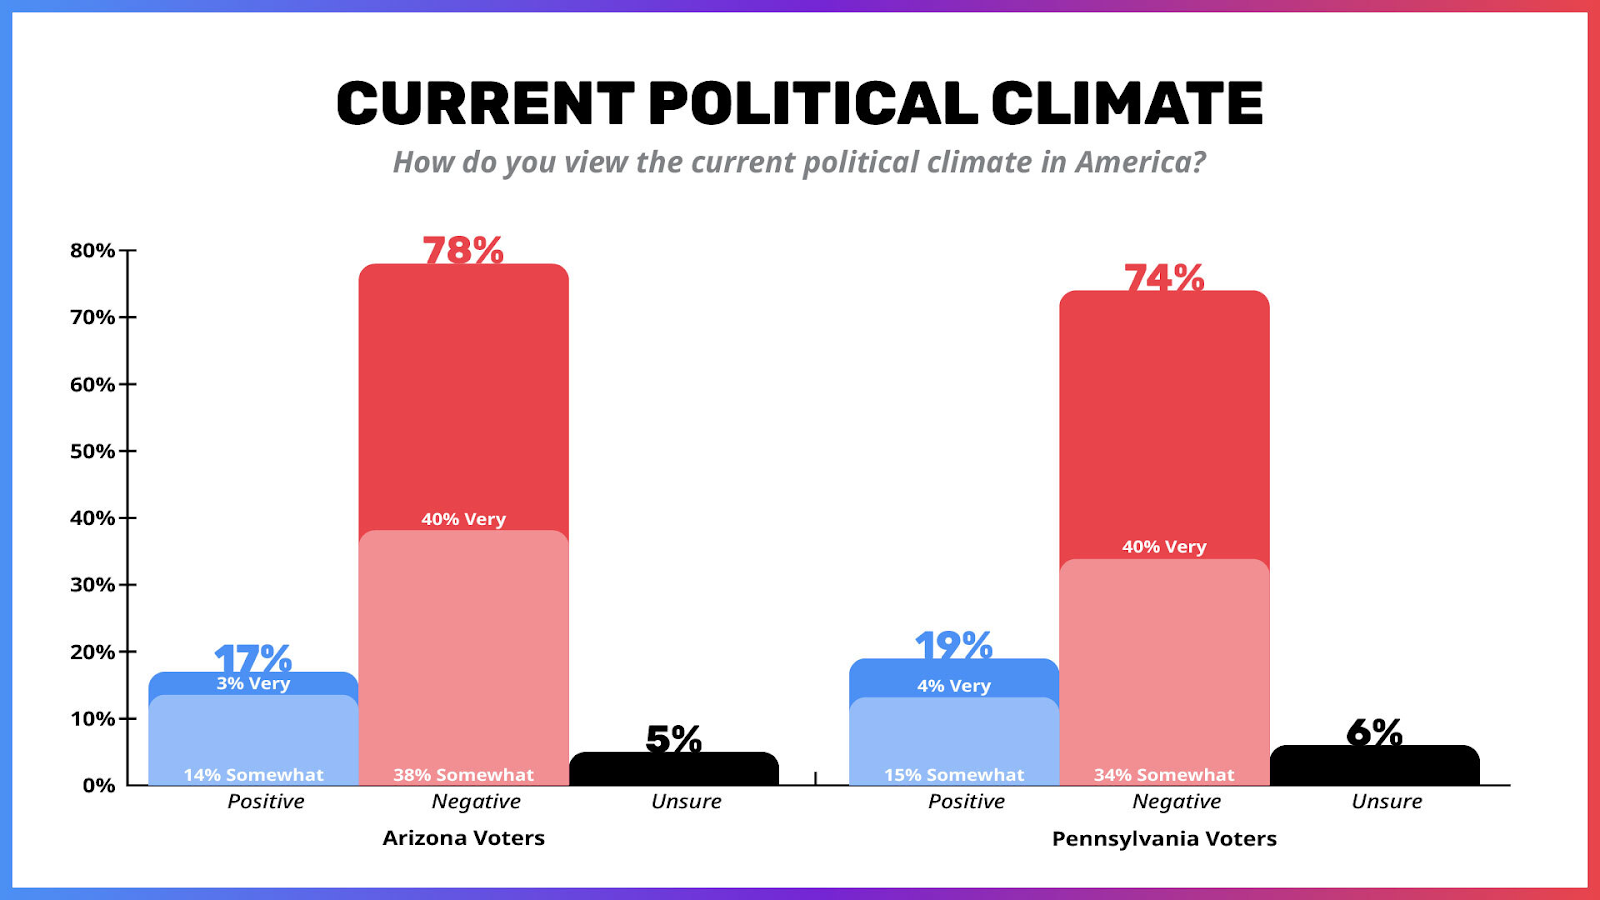 A bar graph showing the responses of asking voters in Arizona and Pennsylvania to the question "How do you view the current political climate in America?" 
78% of voters in Arizona view it negatively. 74% in Pennsylvania view it negatively.  